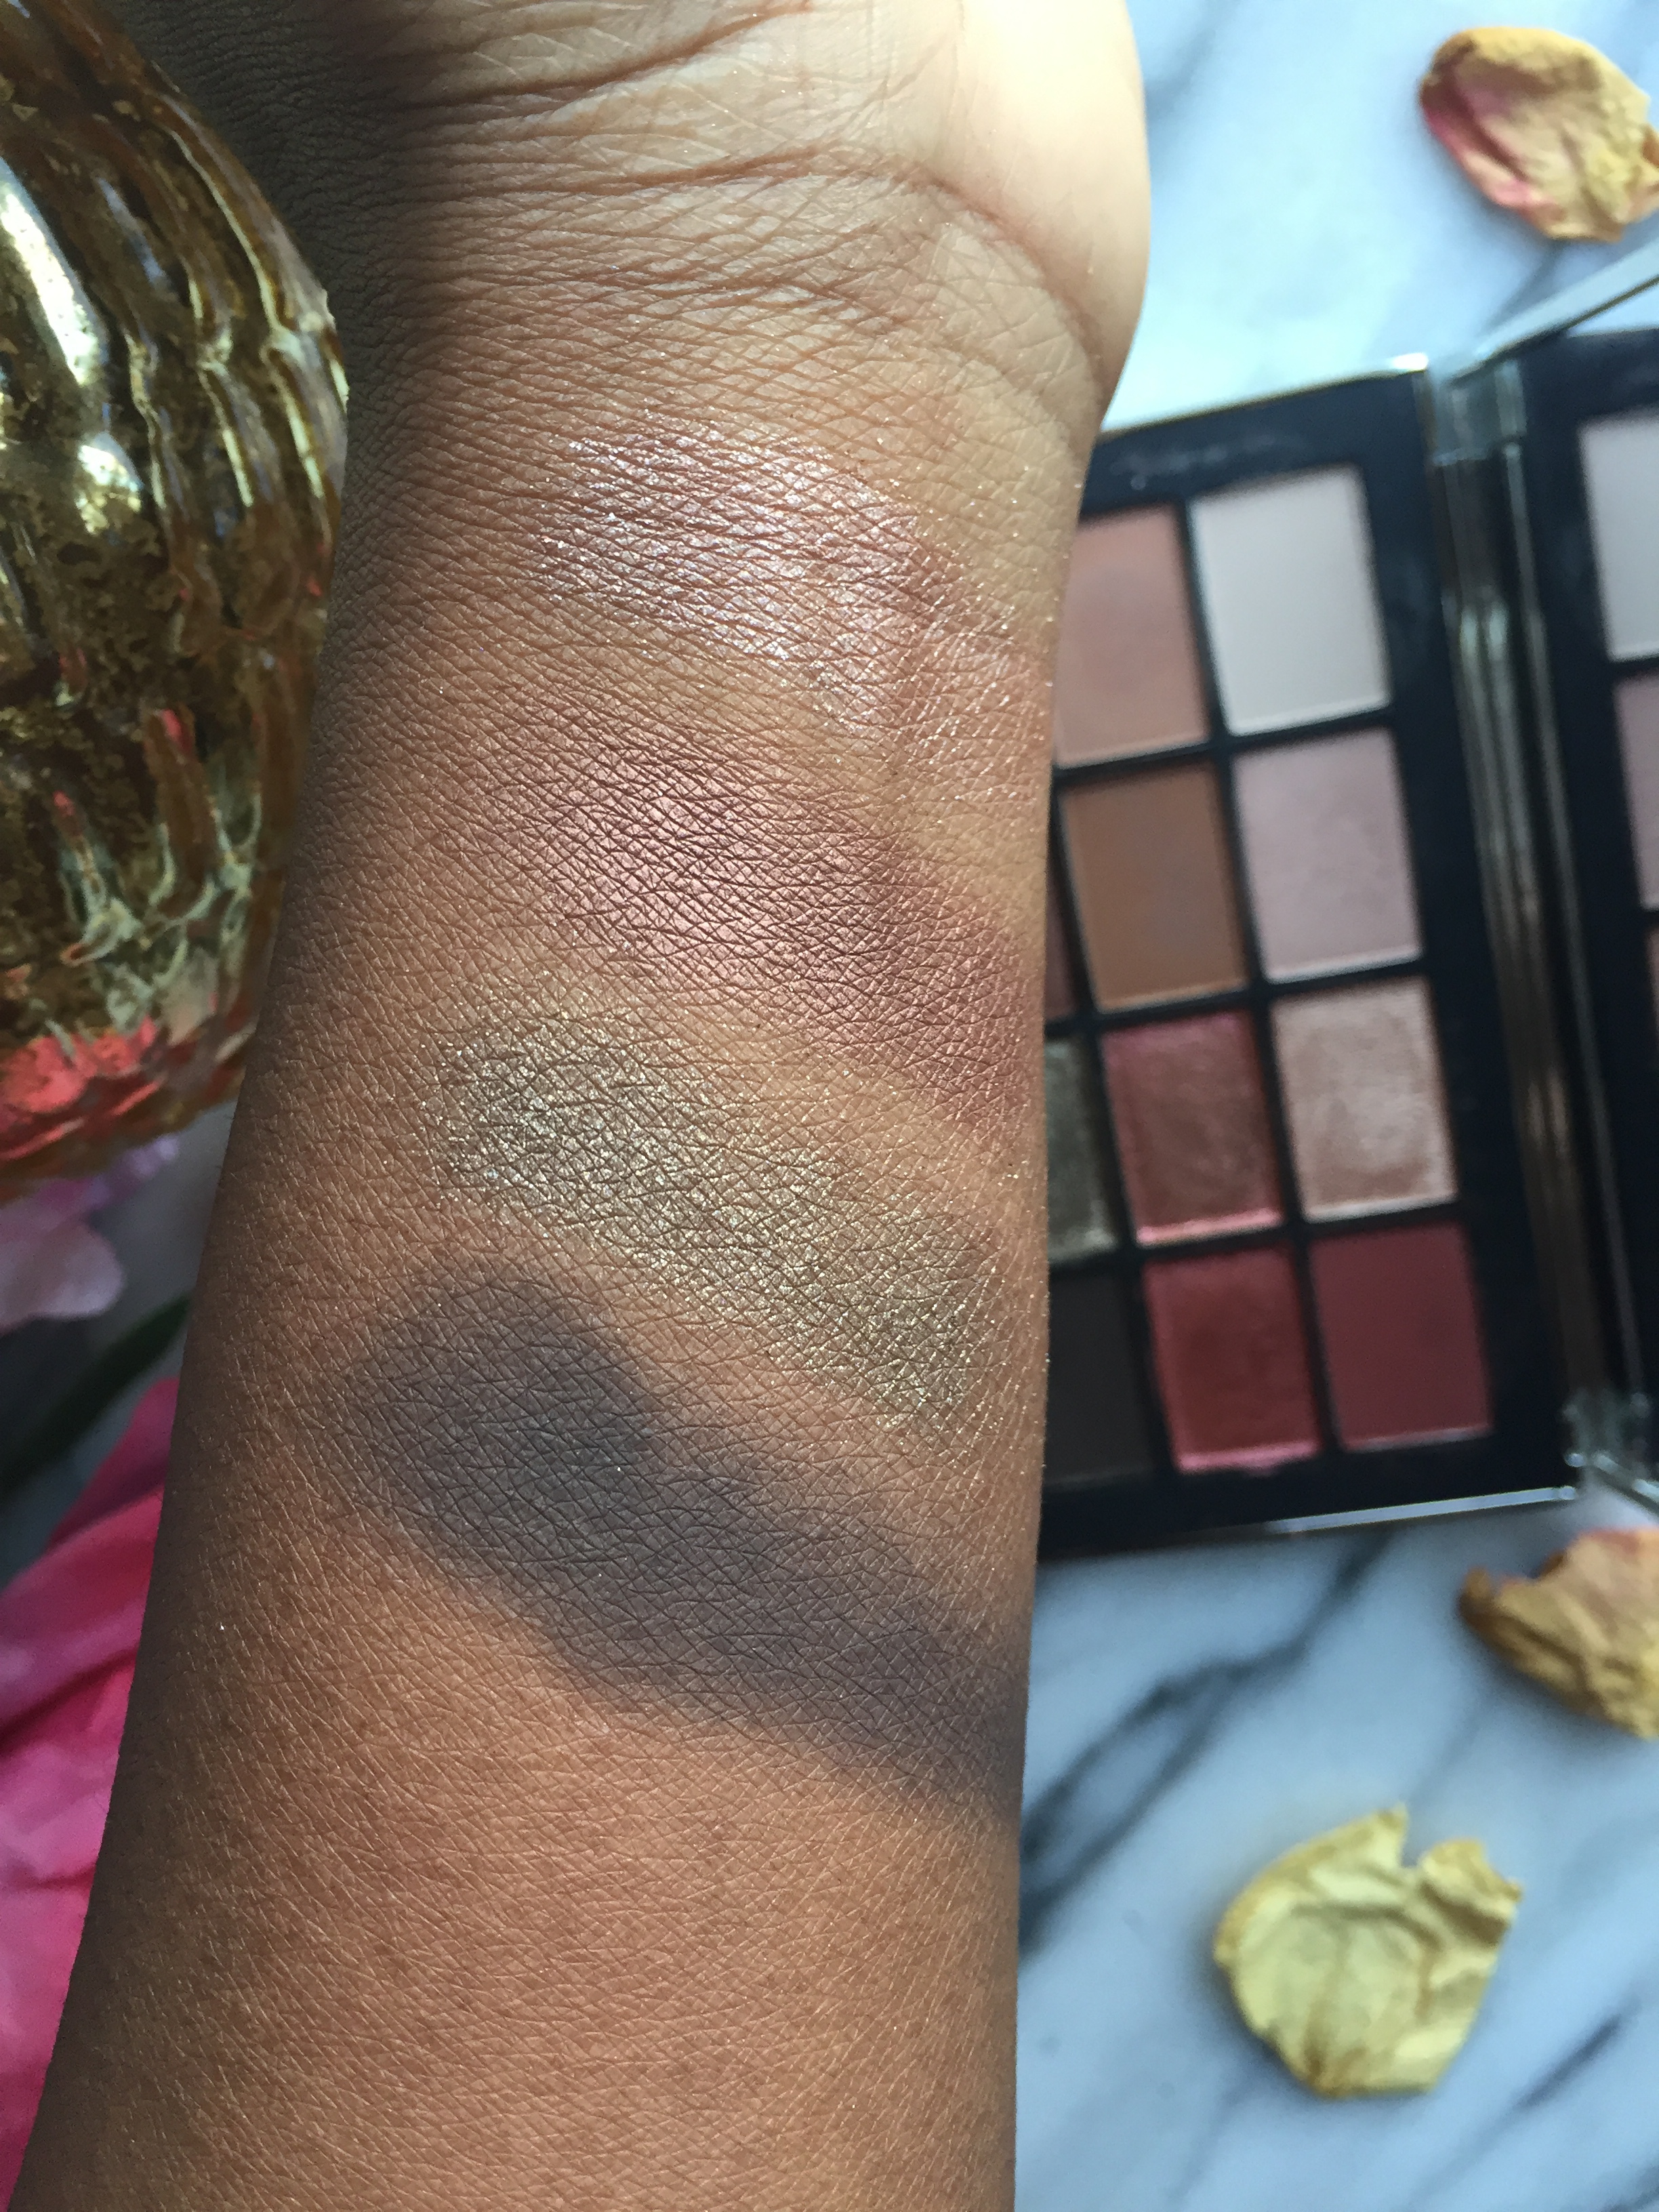 Brush Swatches L to R: Coconut Grove, Fallen Star, LaLa, Shooting Star